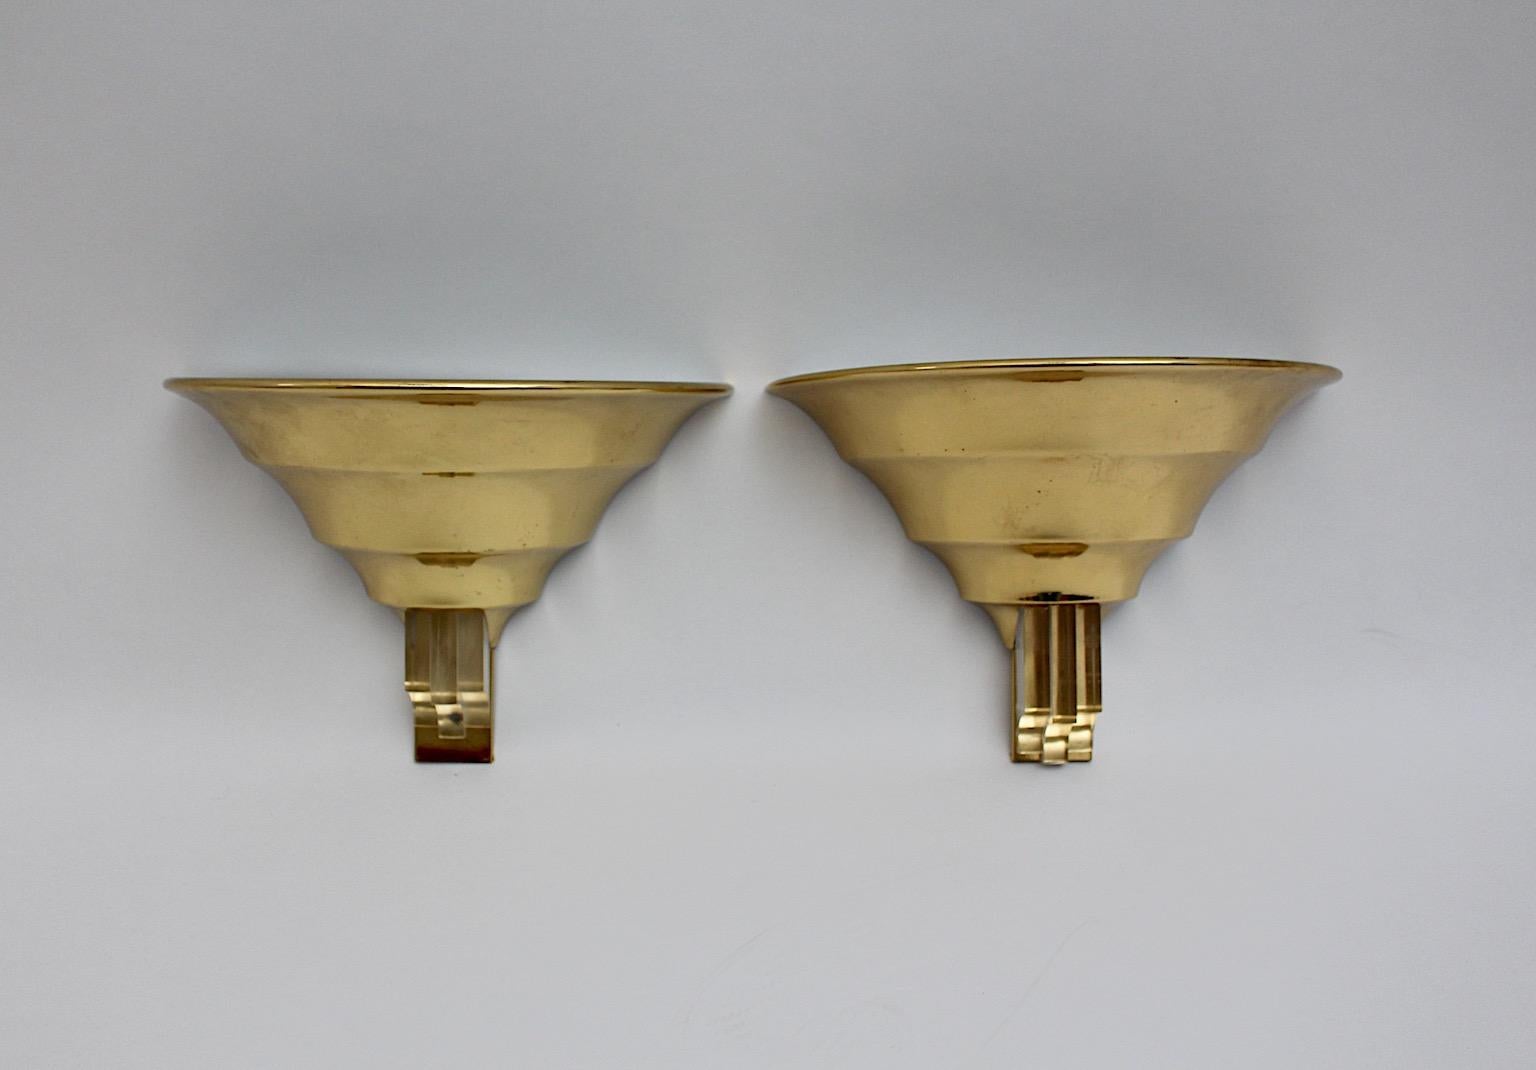 Art Deco Style Vintage Brass Lucite Sconces Wall Lights Duo Pair 1980s Italy For Sale 1